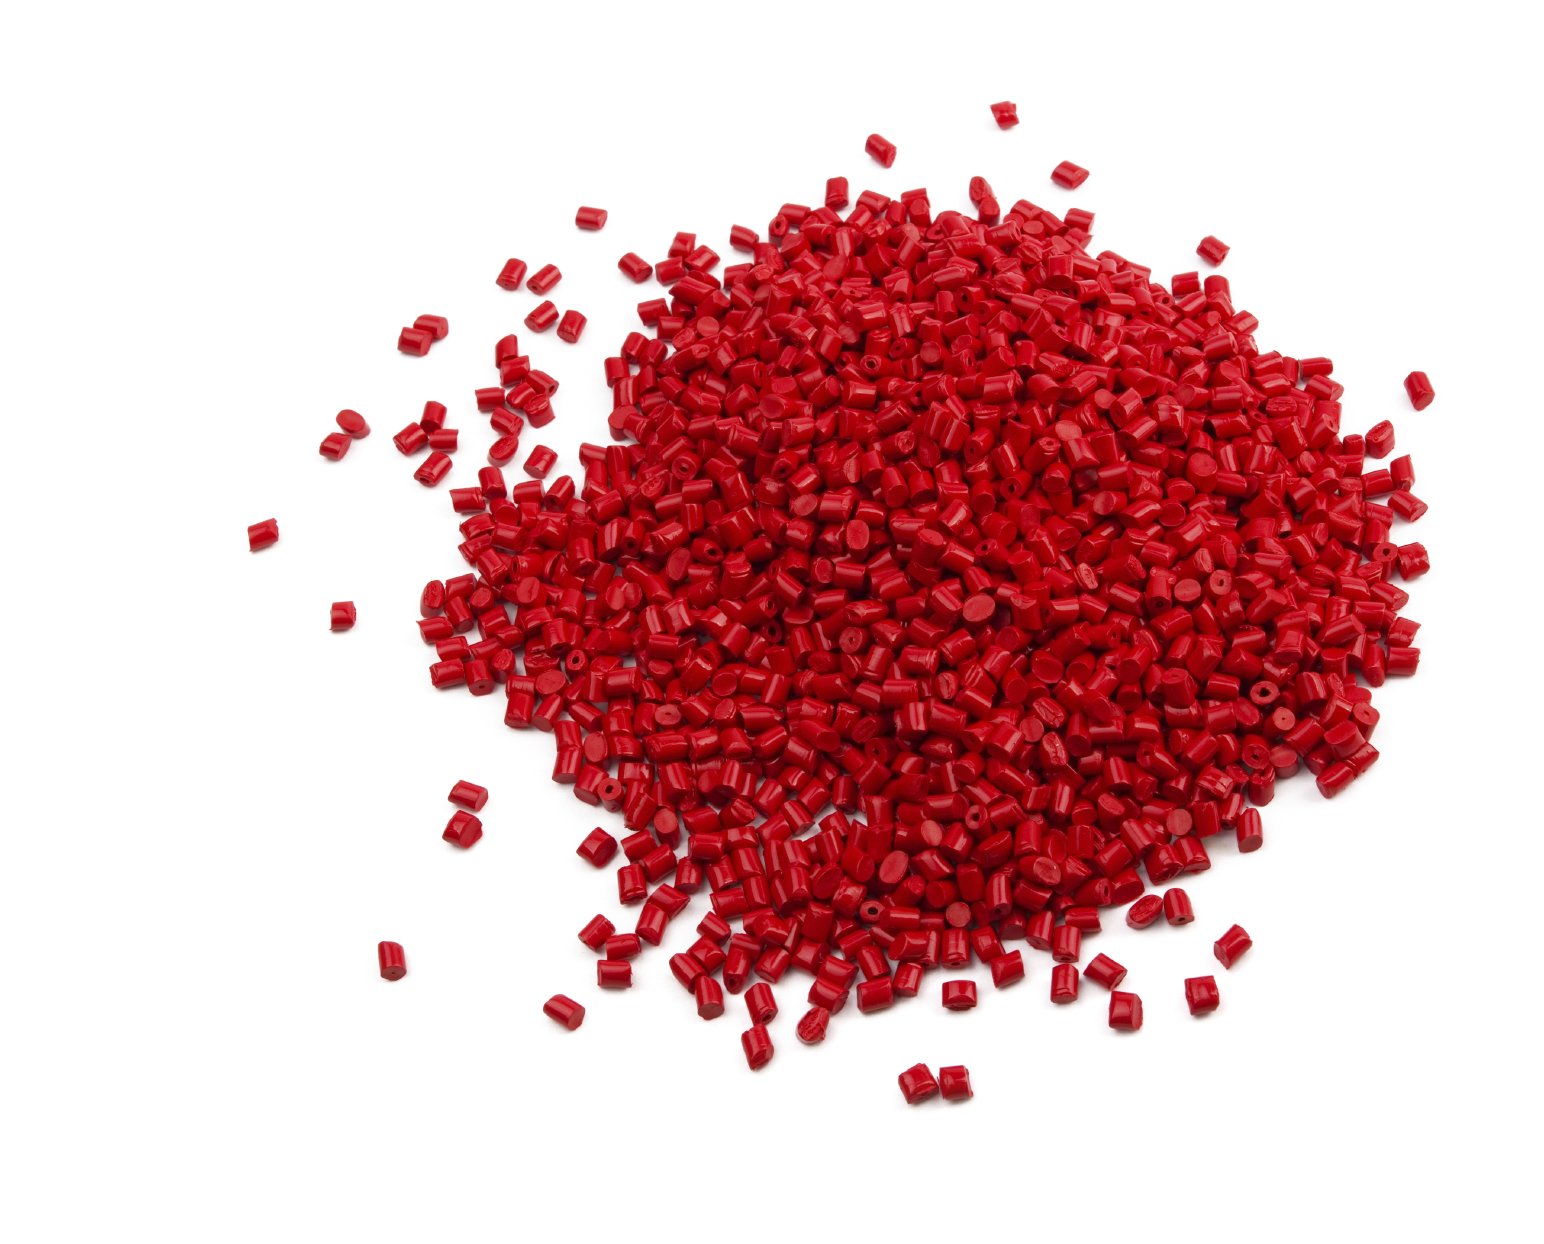 Pile of red plastic granules isolated on white